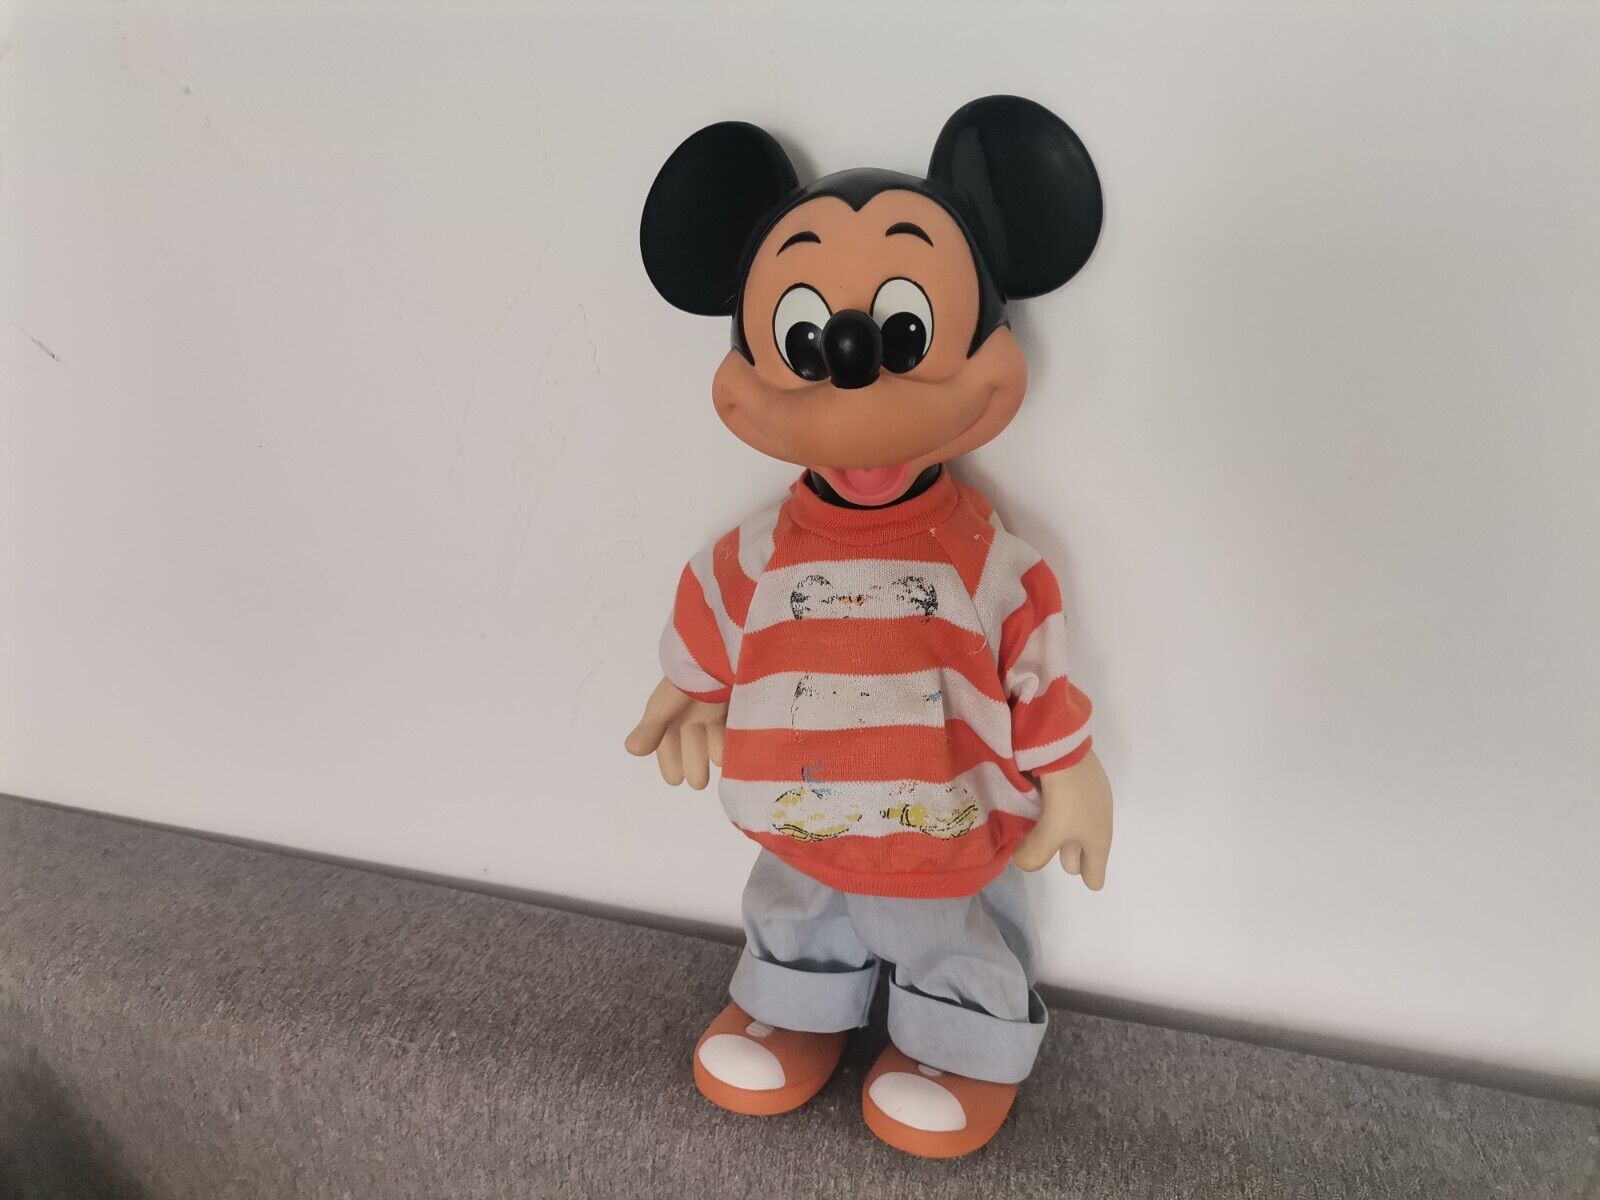 Vintage Mickey Mouse battery operated toy by Jesmar Disney